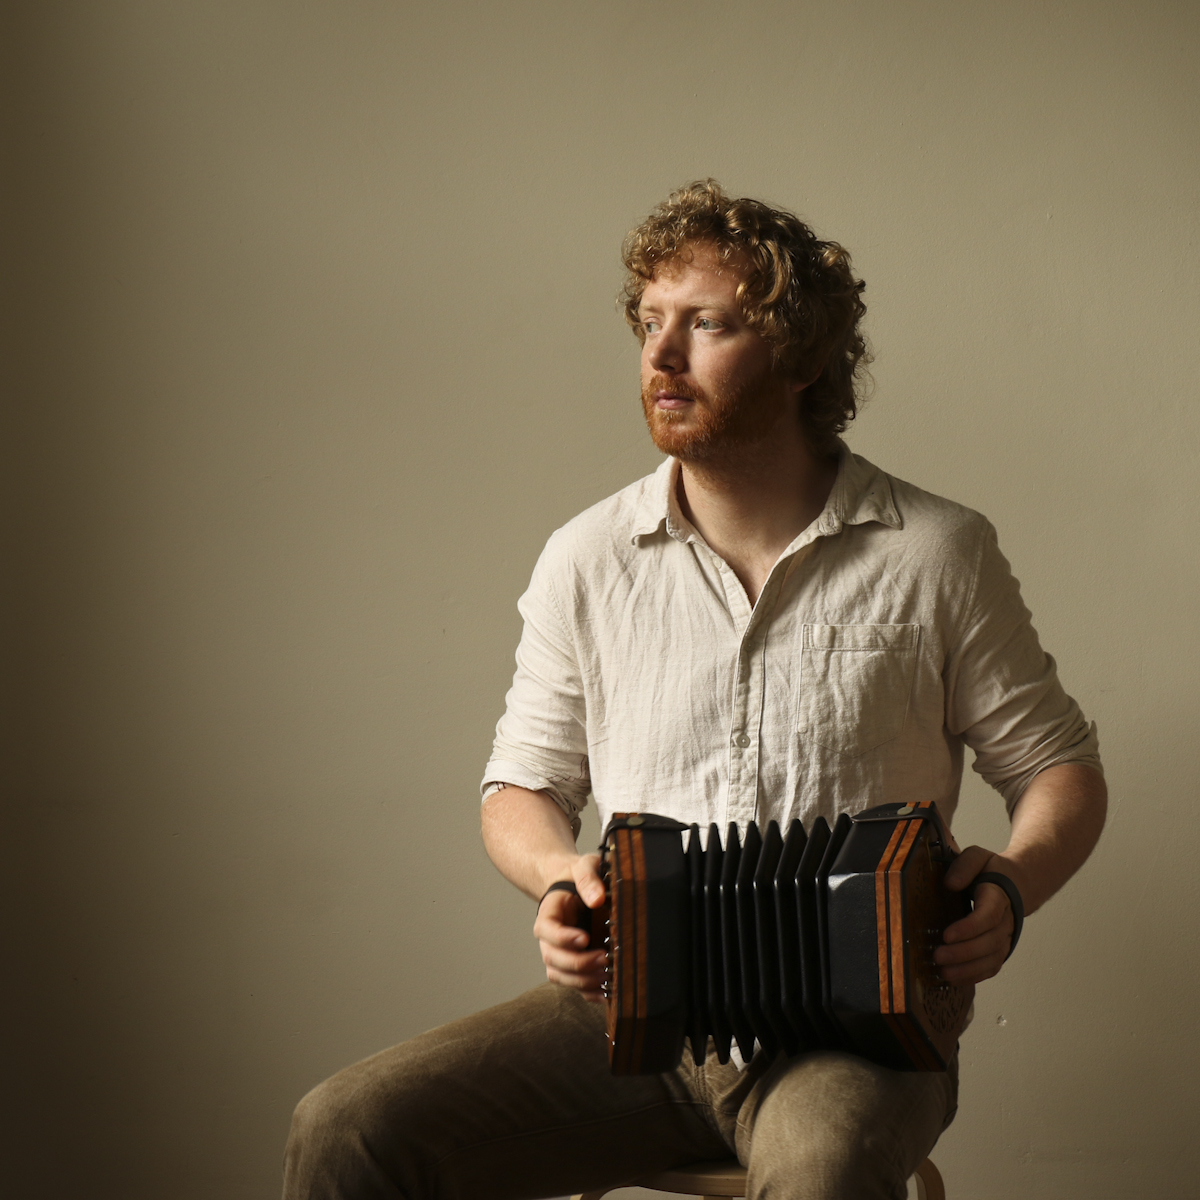 ***Cancelled*** FUAIM Concert - Cormac Begley, 29th October, 1.10pm, St. Fin Barre's Cathedral